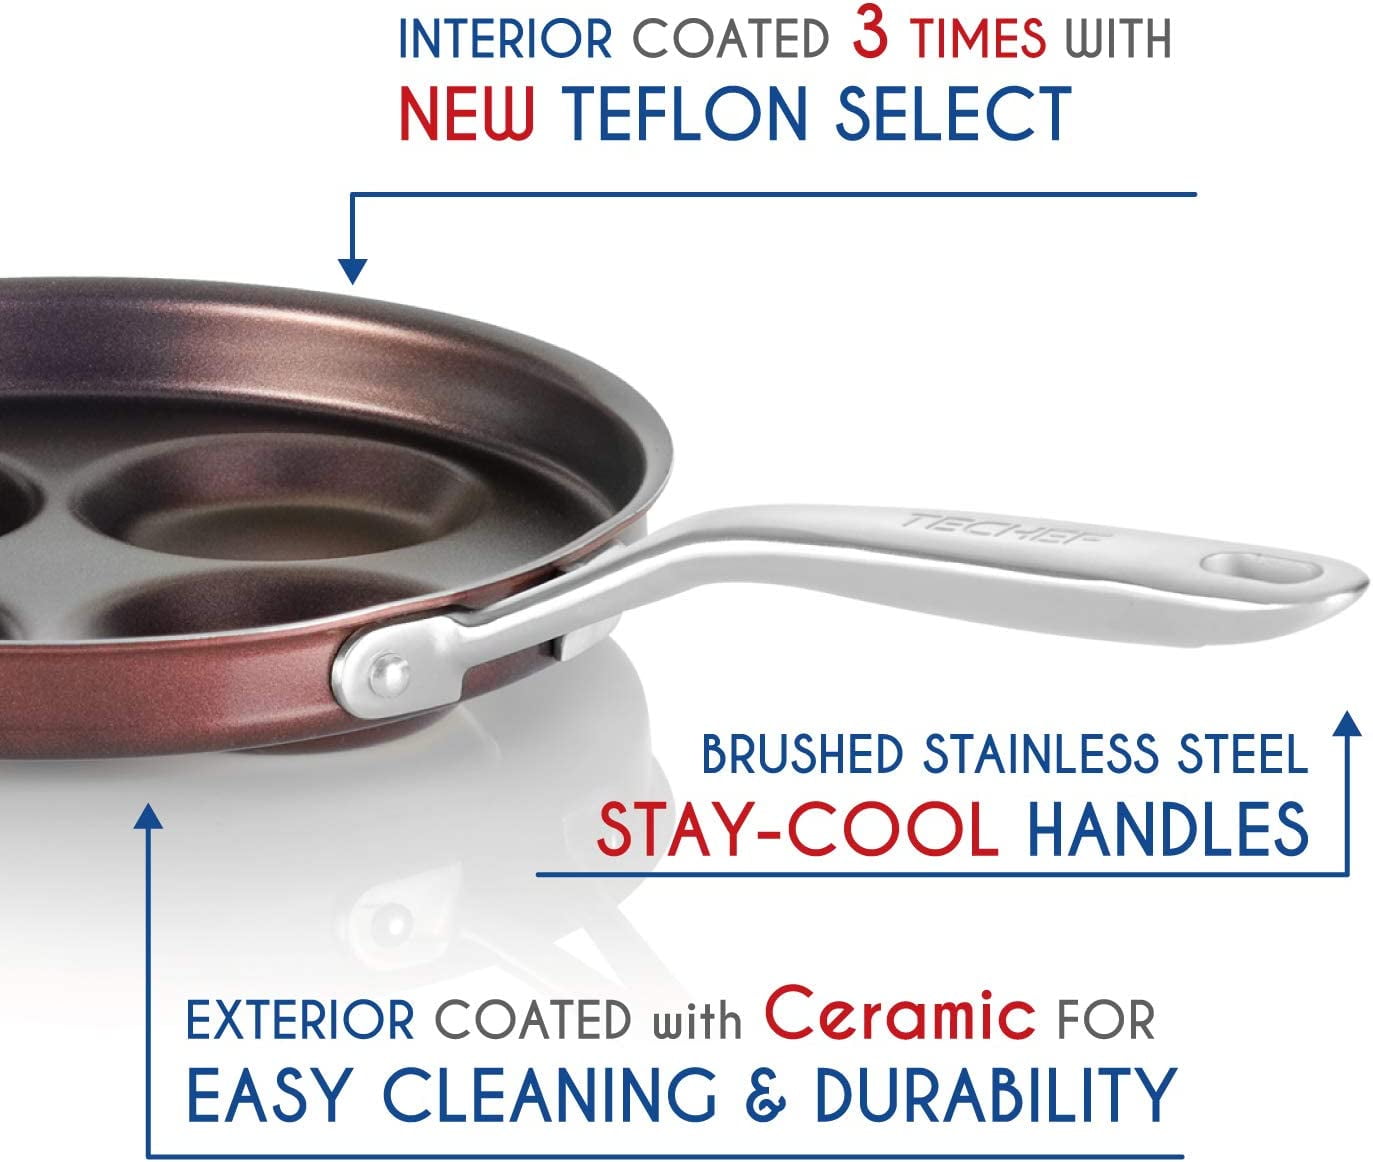 TECHEF - 5.5-Inch One Egg Frying Pan with New Teflon Select Nonstick  Coating